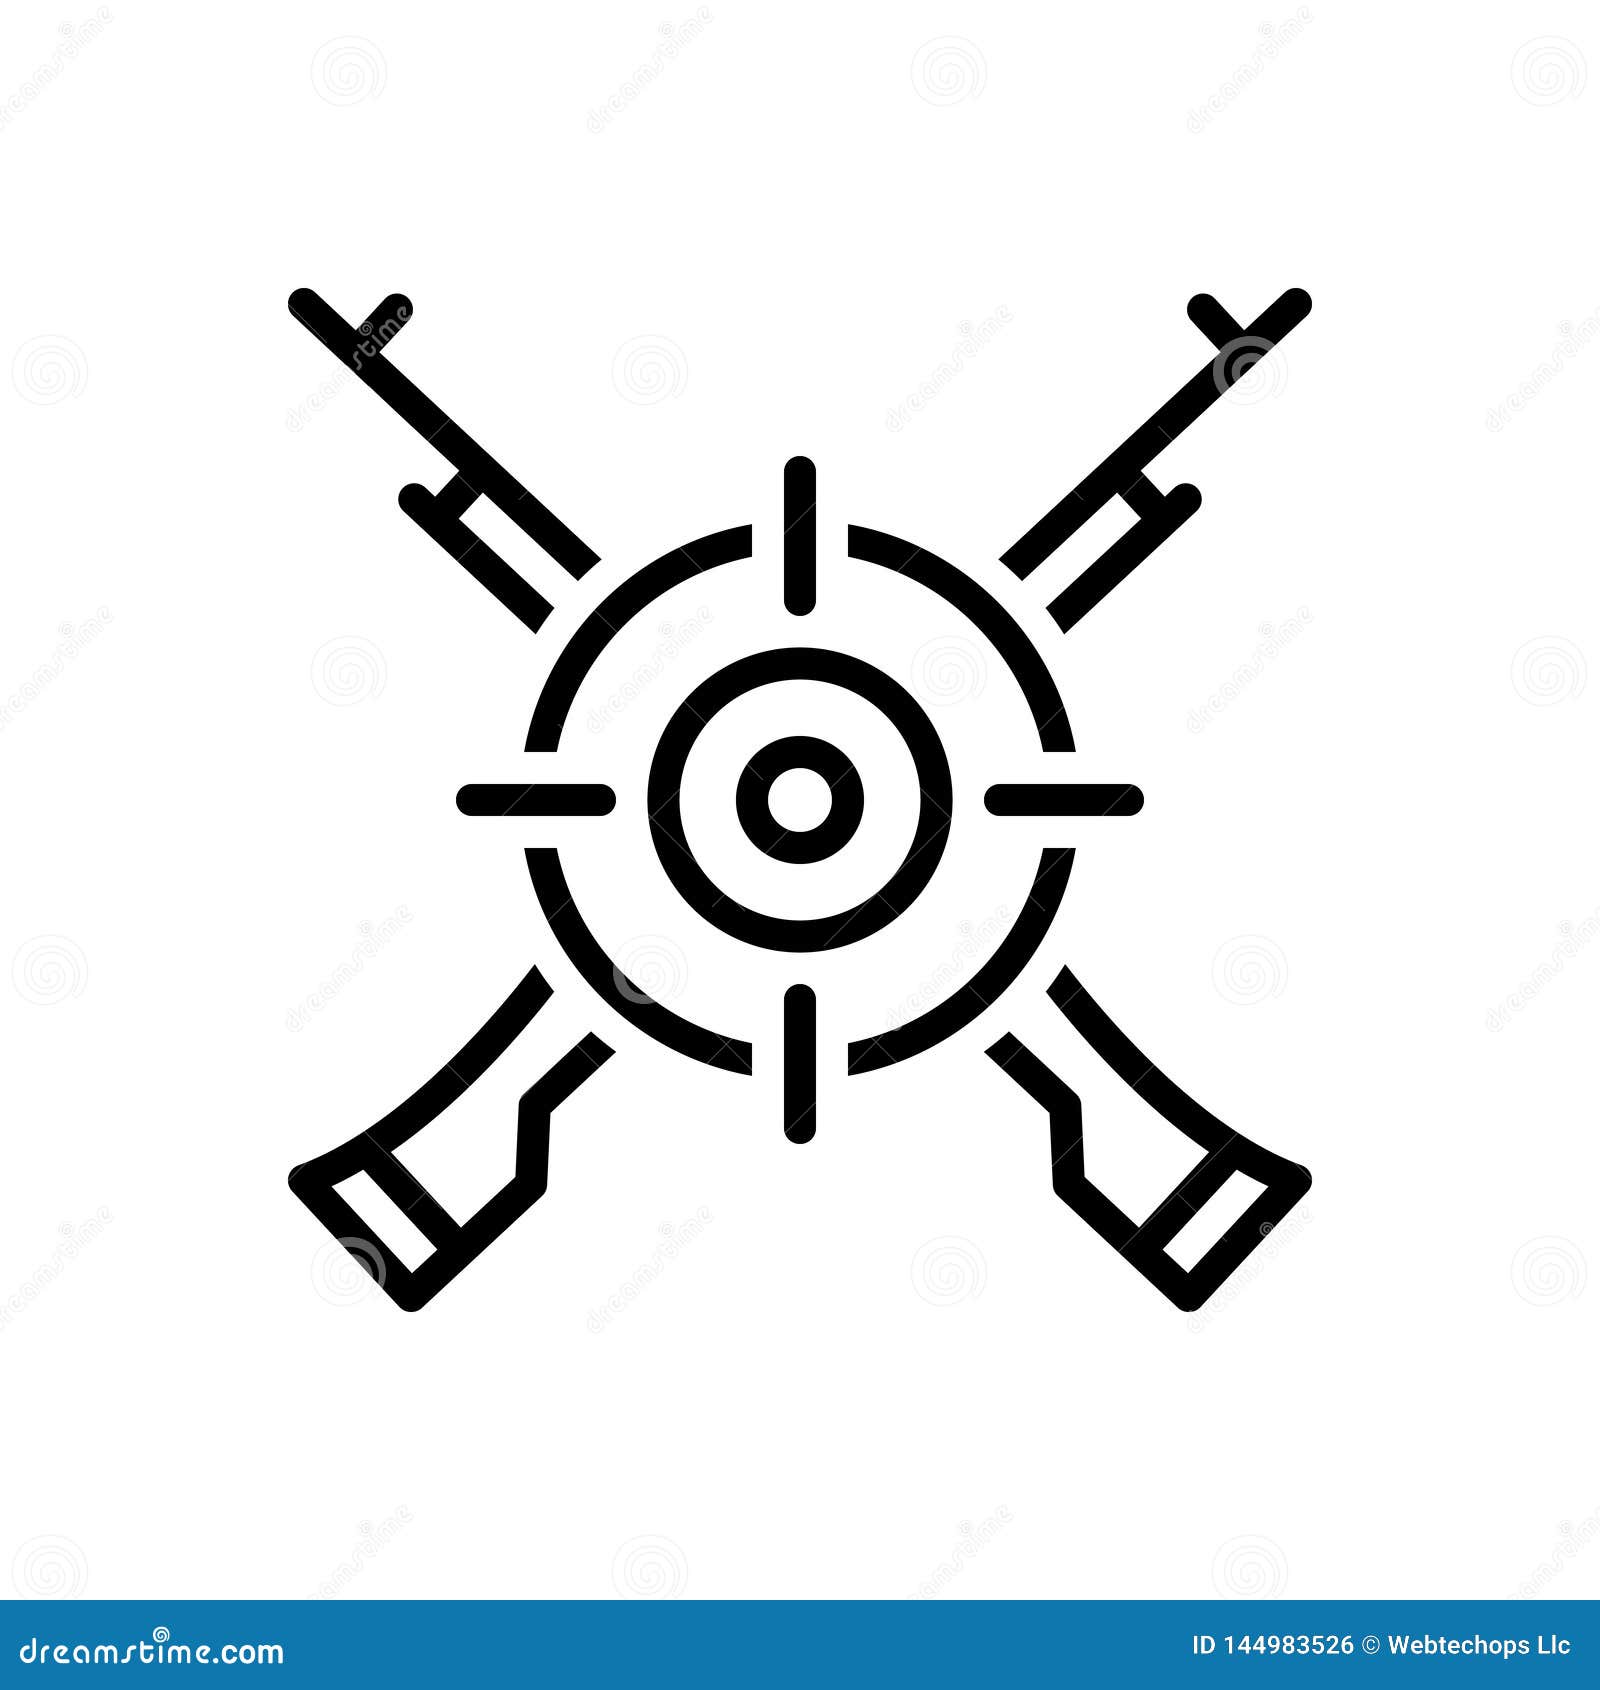 black line icon for marksman, sharpshooter and target